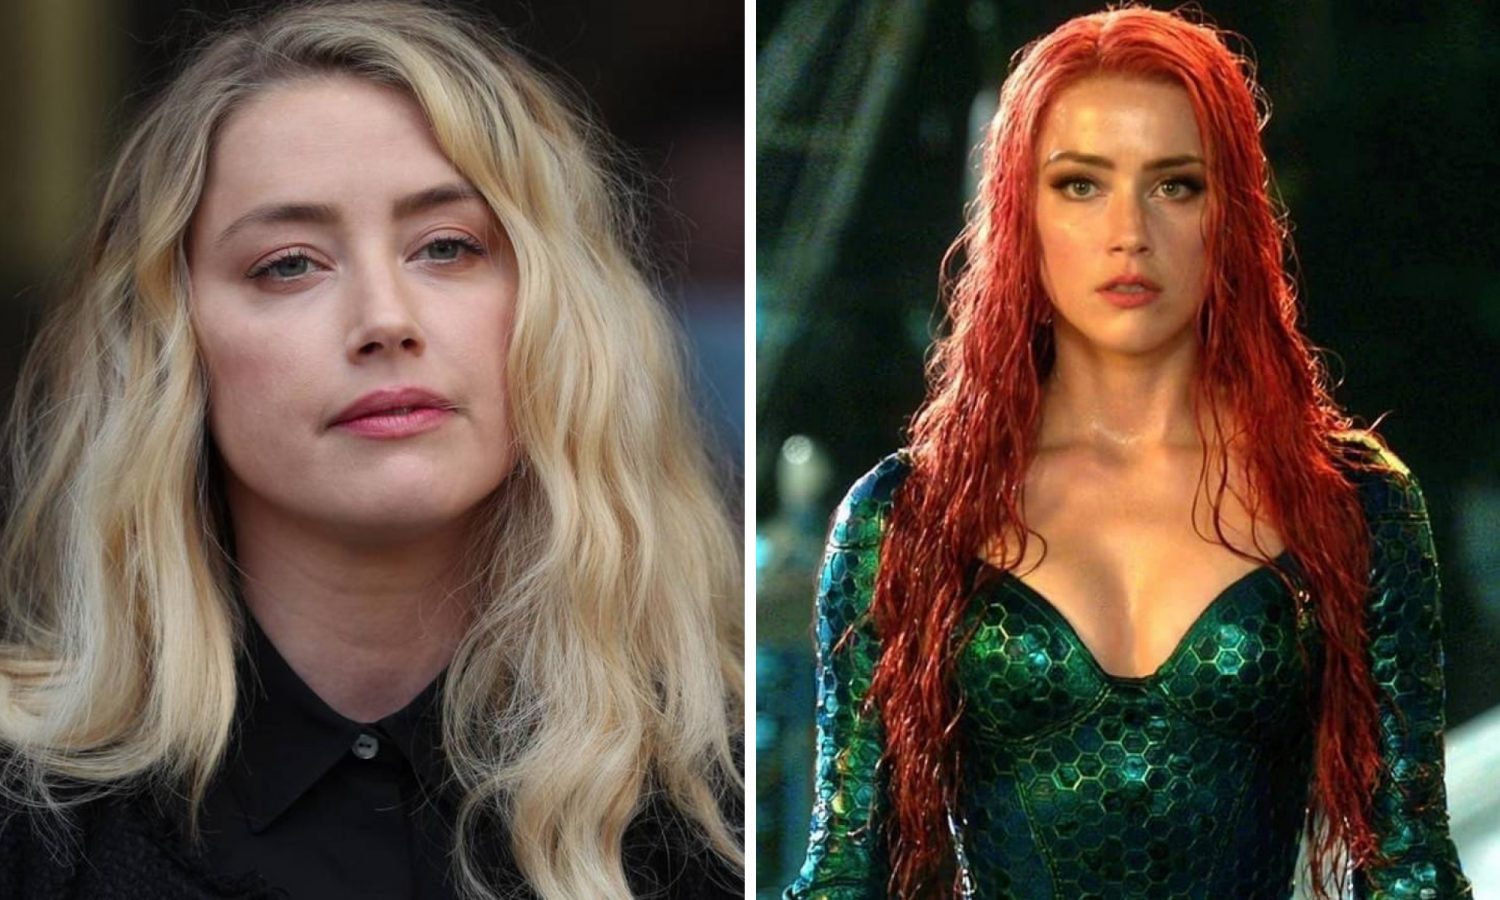 aquaman 2 producer shuts down johnny depp fans who want amber heard fired